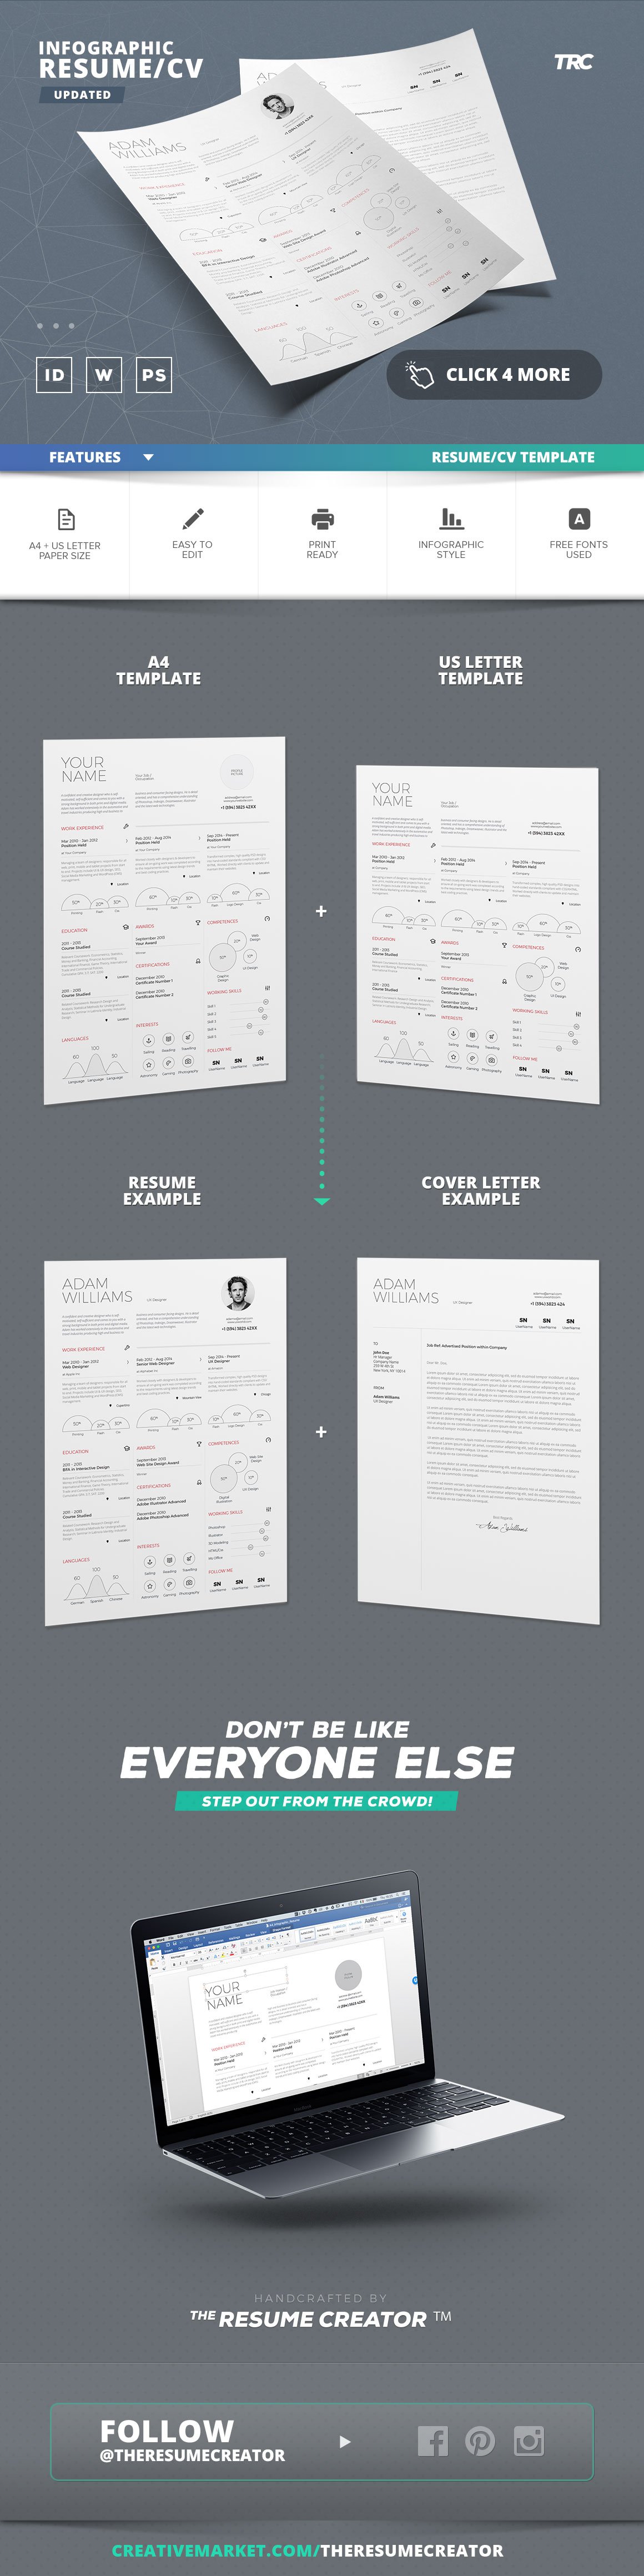 Infographic Resume/Cv Template Vol.4 preview image.